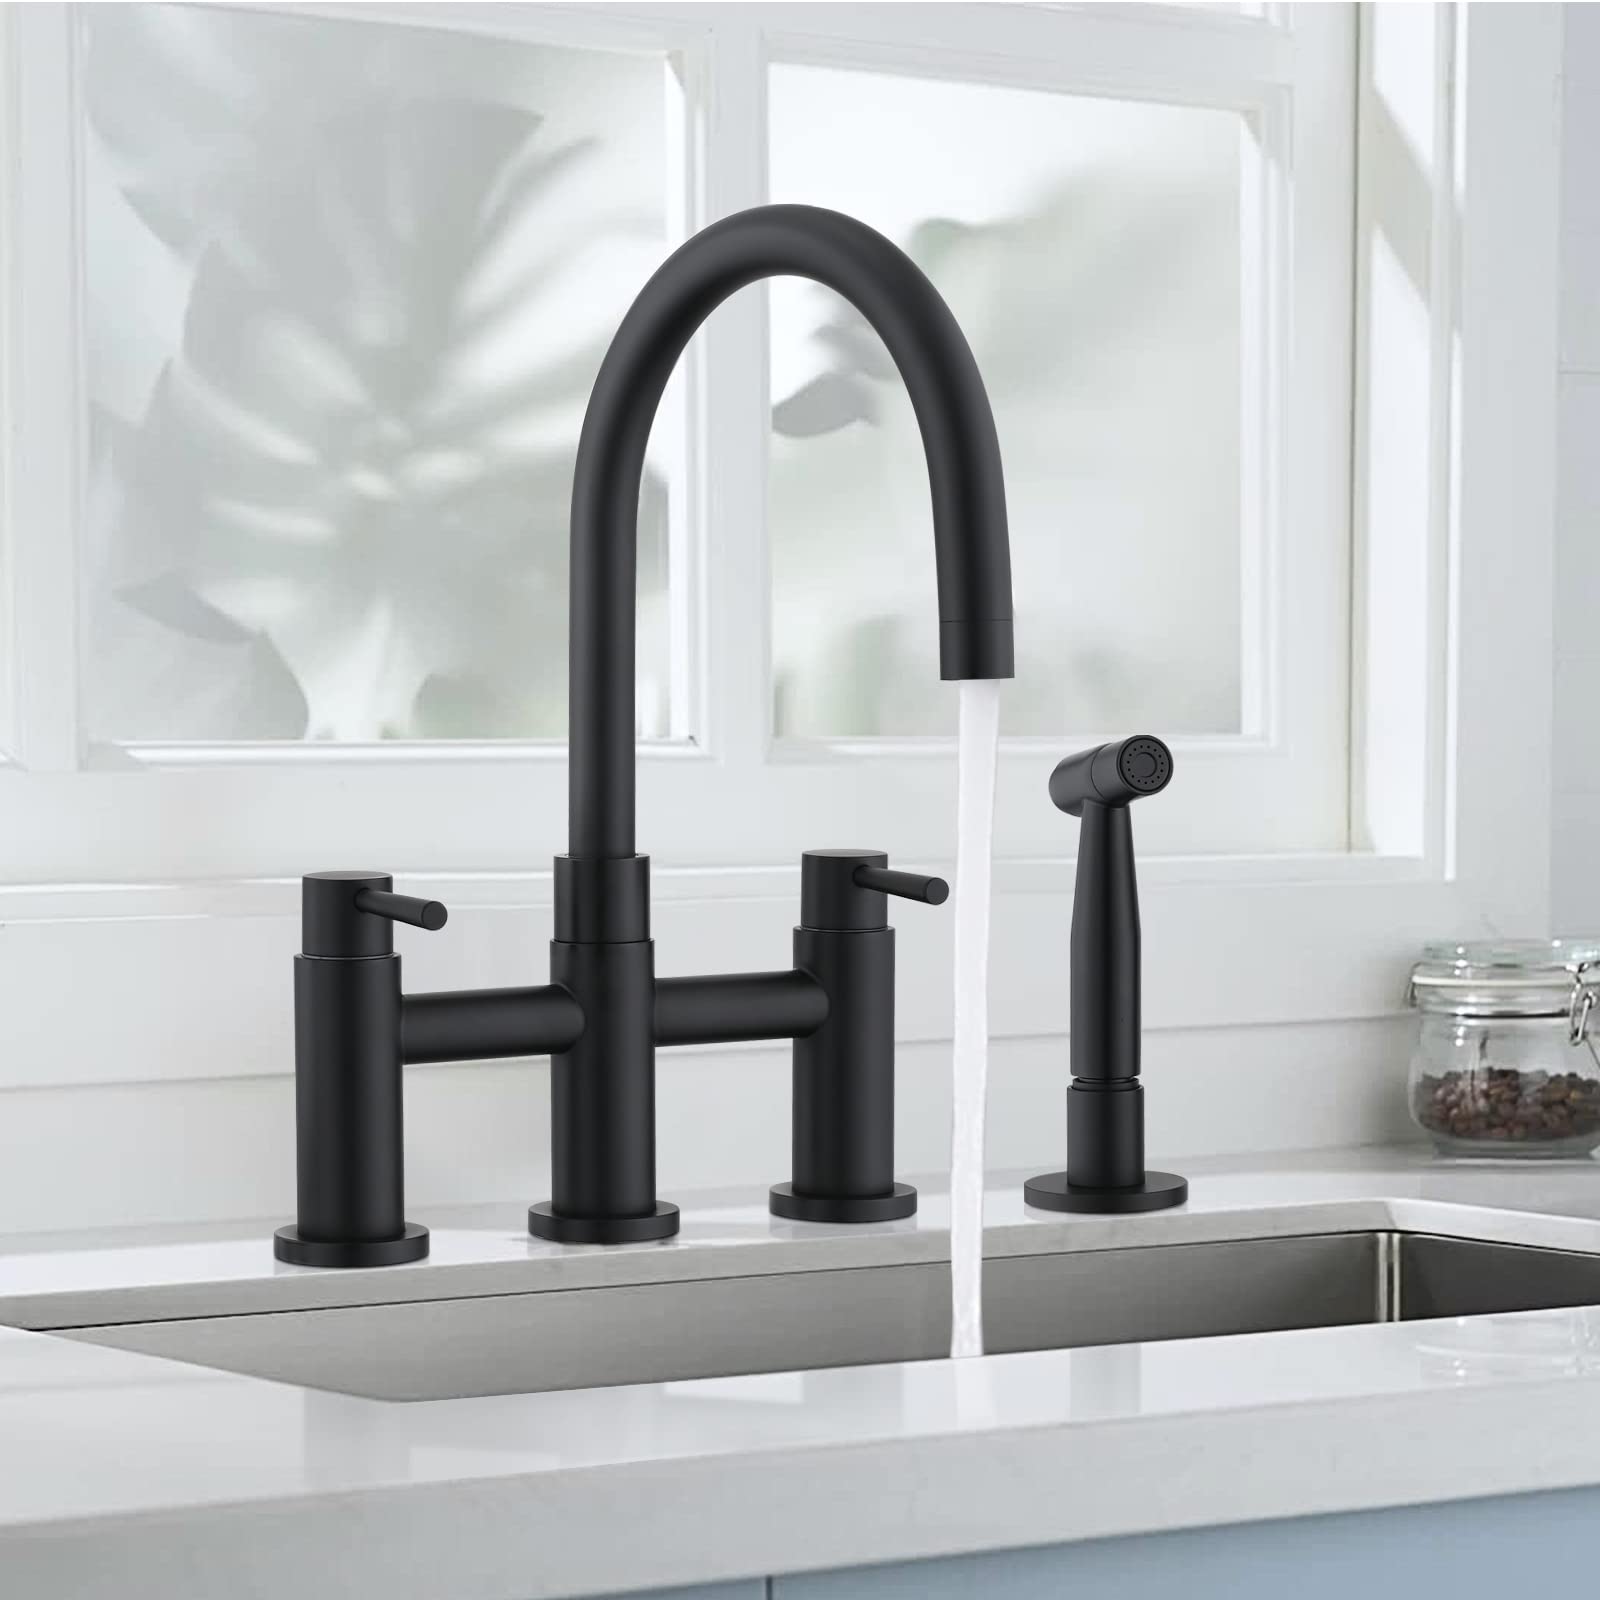 TRADITIONAL FAUCETS